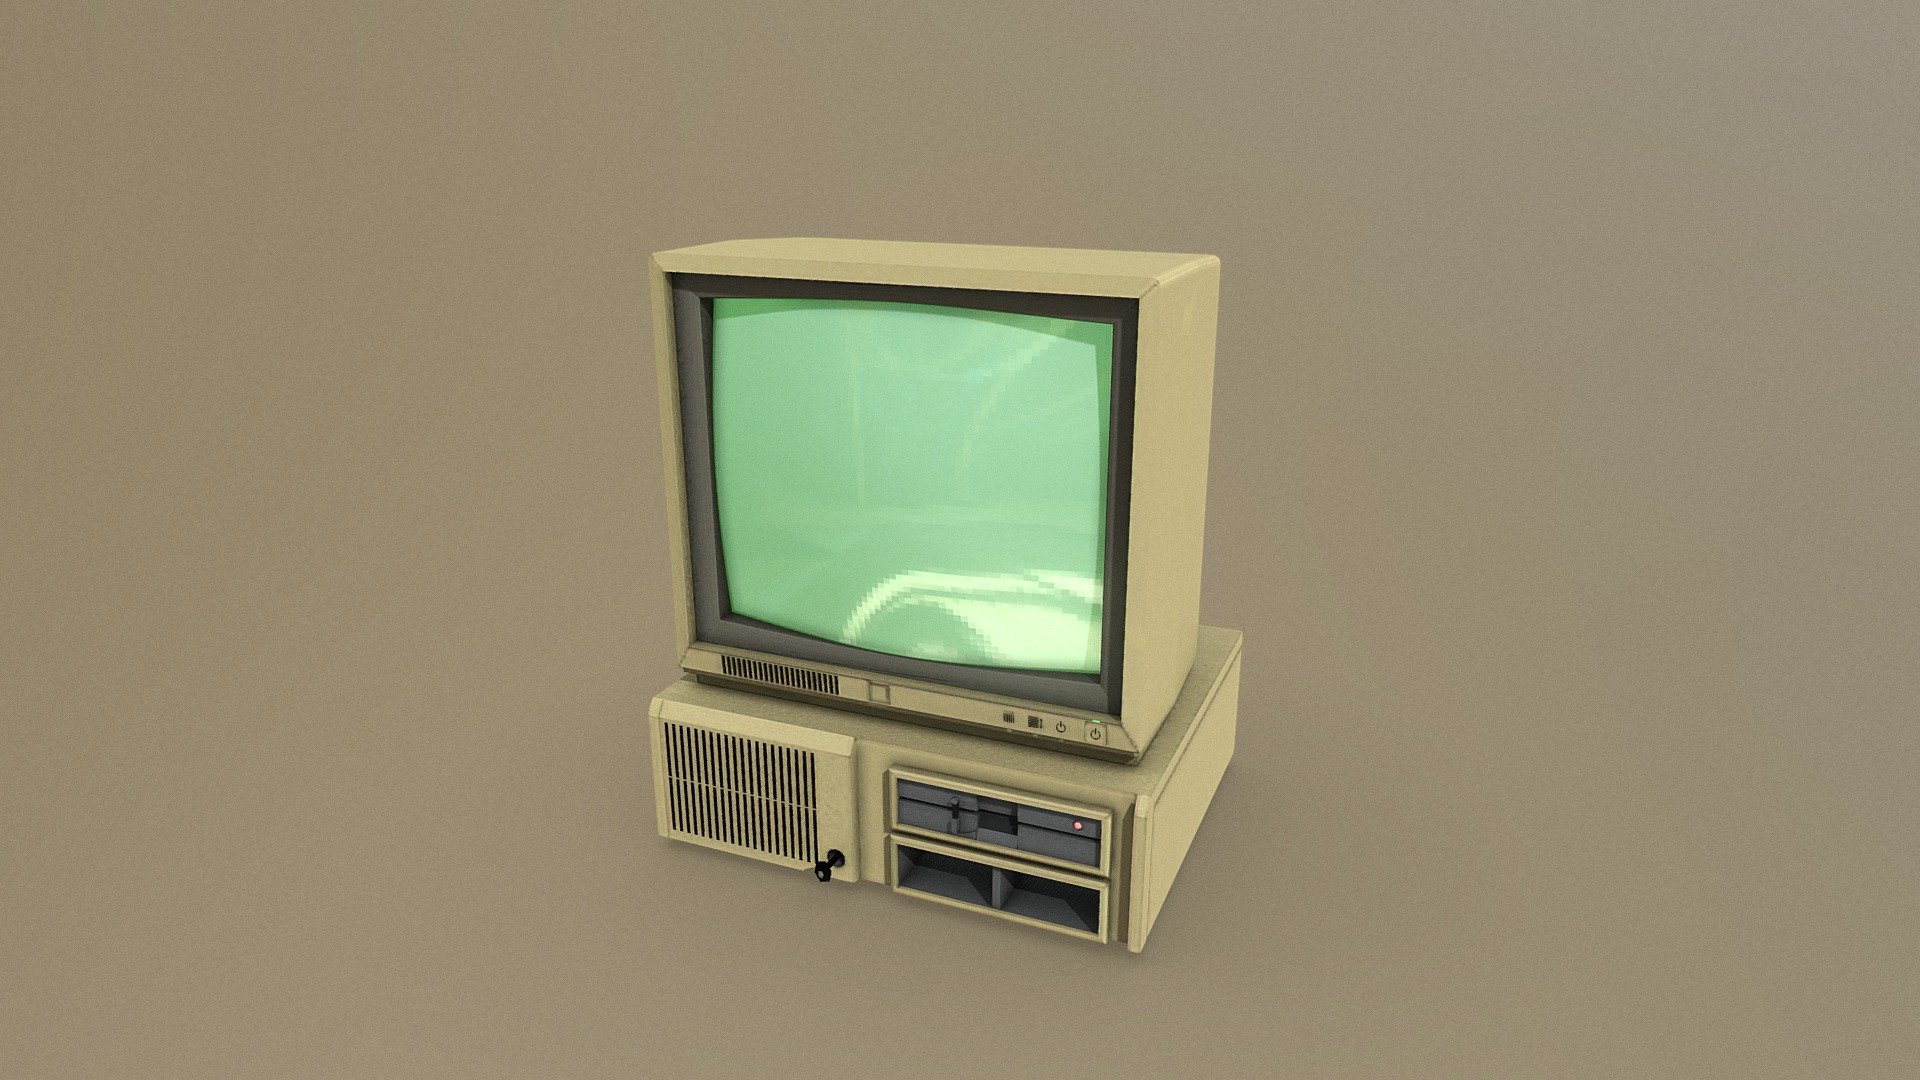 Back to the times when 16KB of ram where enough&hellip; great old times

Take a seat in the time machine and have a look at the beginning of 80's with this Asset model, videogames ready, render ready, whatever you need it for, go for it!

Sculpted, texturized, Modeled in Blender 3.2.1 - Old Retro Computer Asset - IBM 1981 Style - Buy Royalty Free 3D model by Smoothie 3D (@arisyn08) 3d model